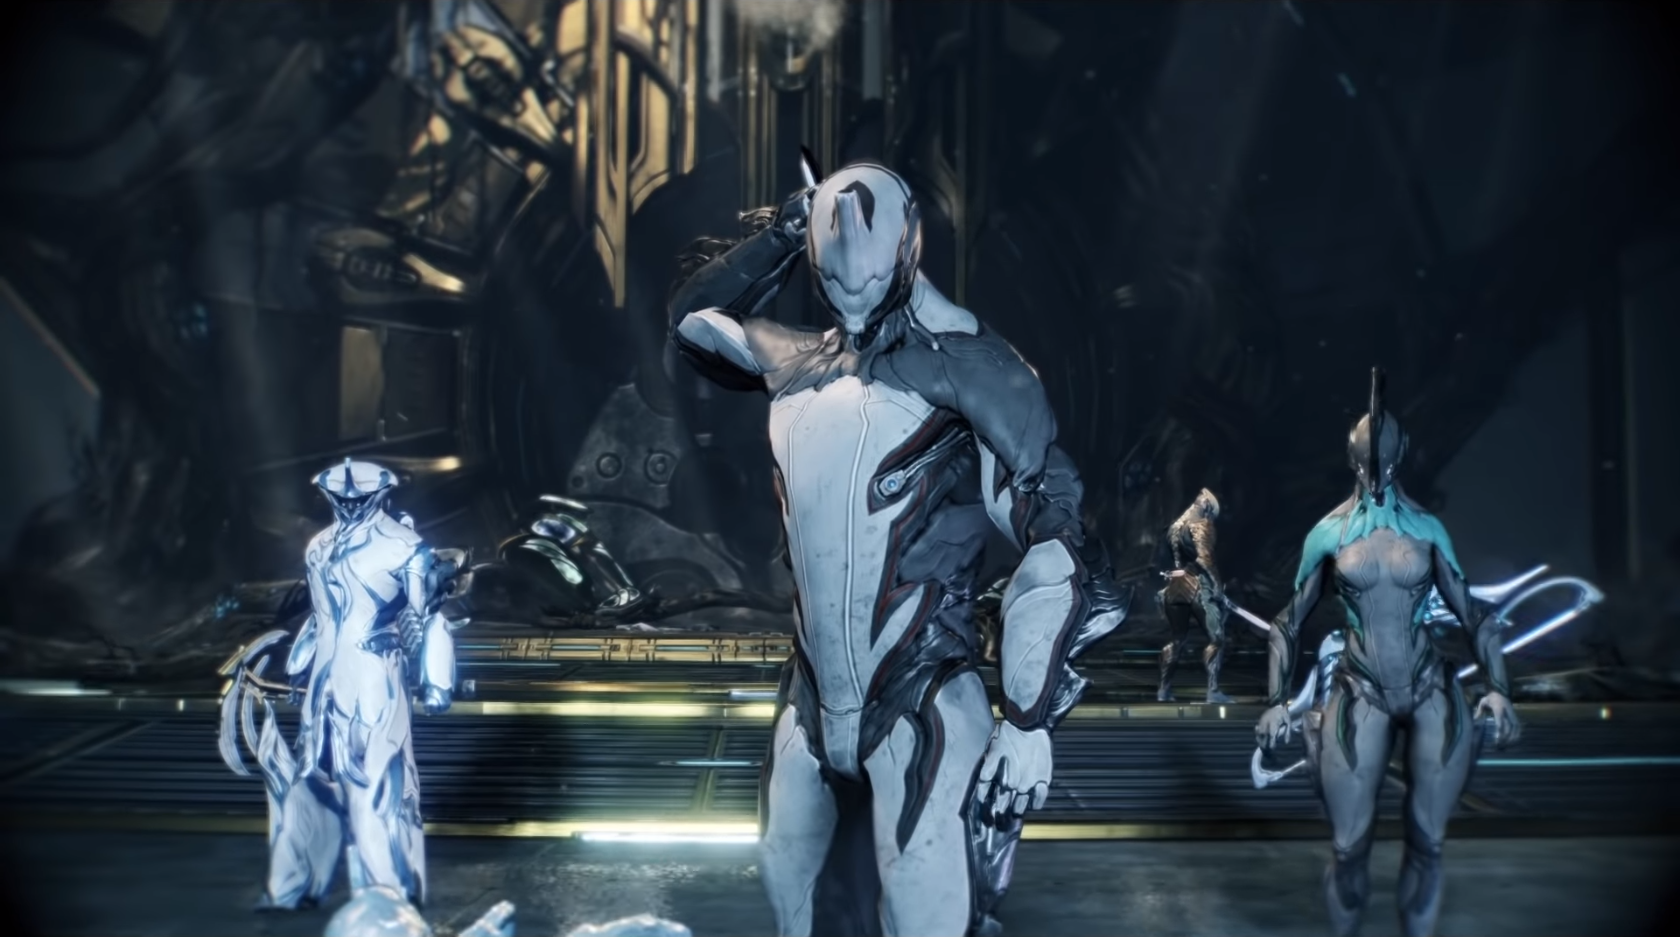 Warframe exo-armor uses unique combative technology to create the